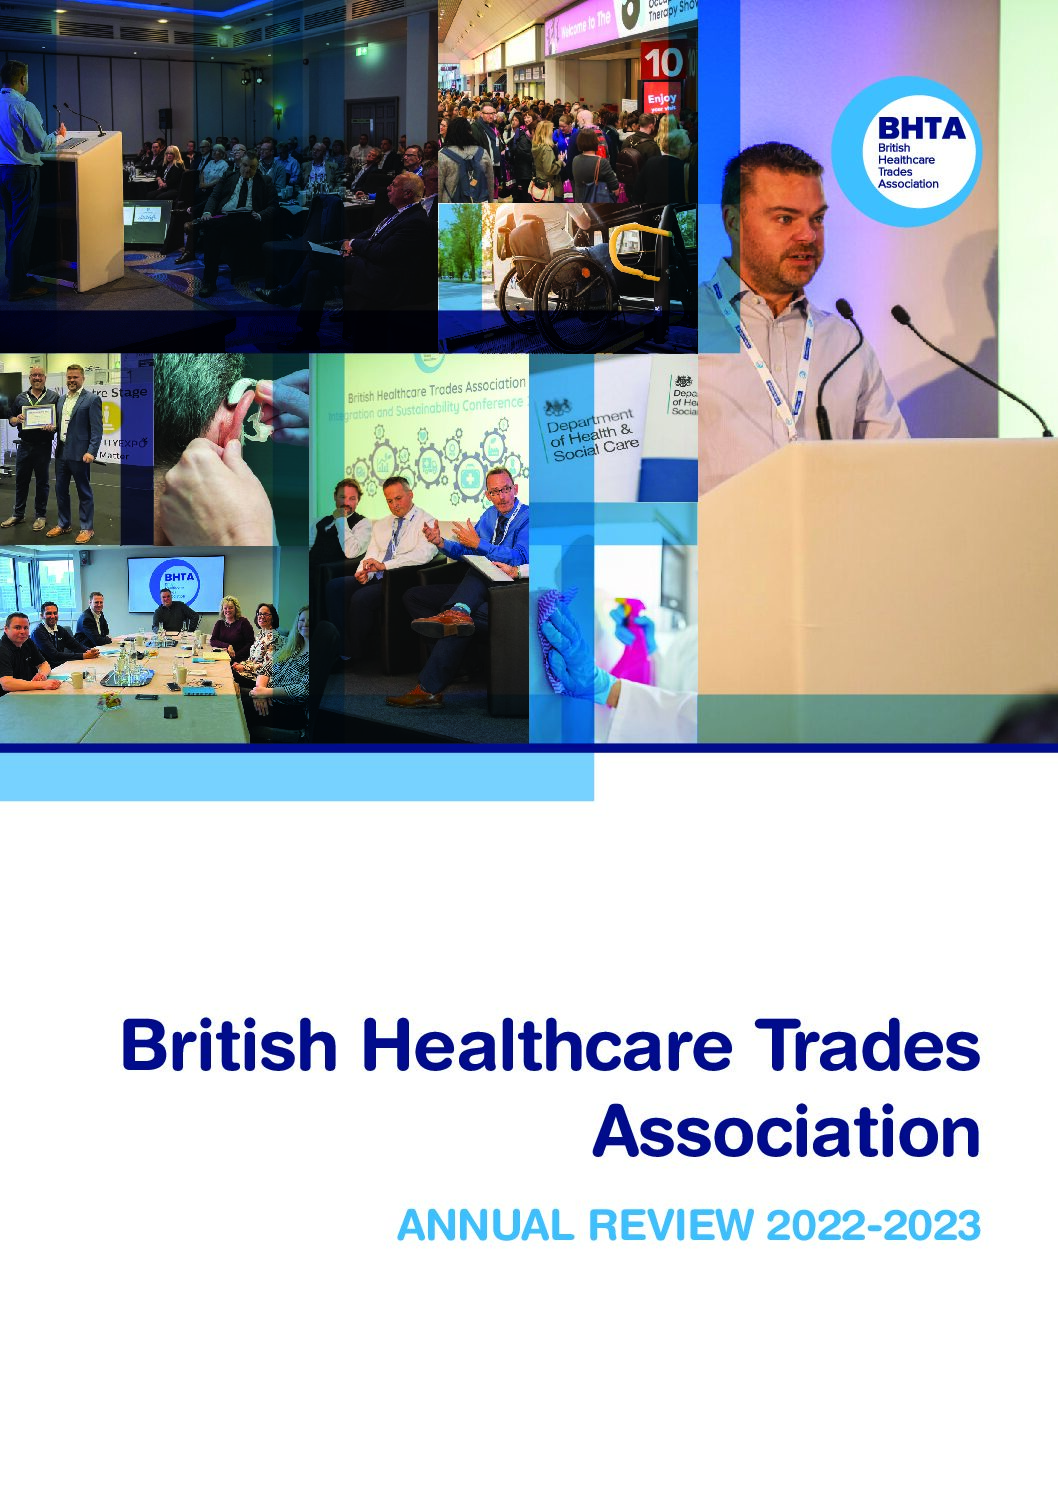 BHTA Annual Review 22-23